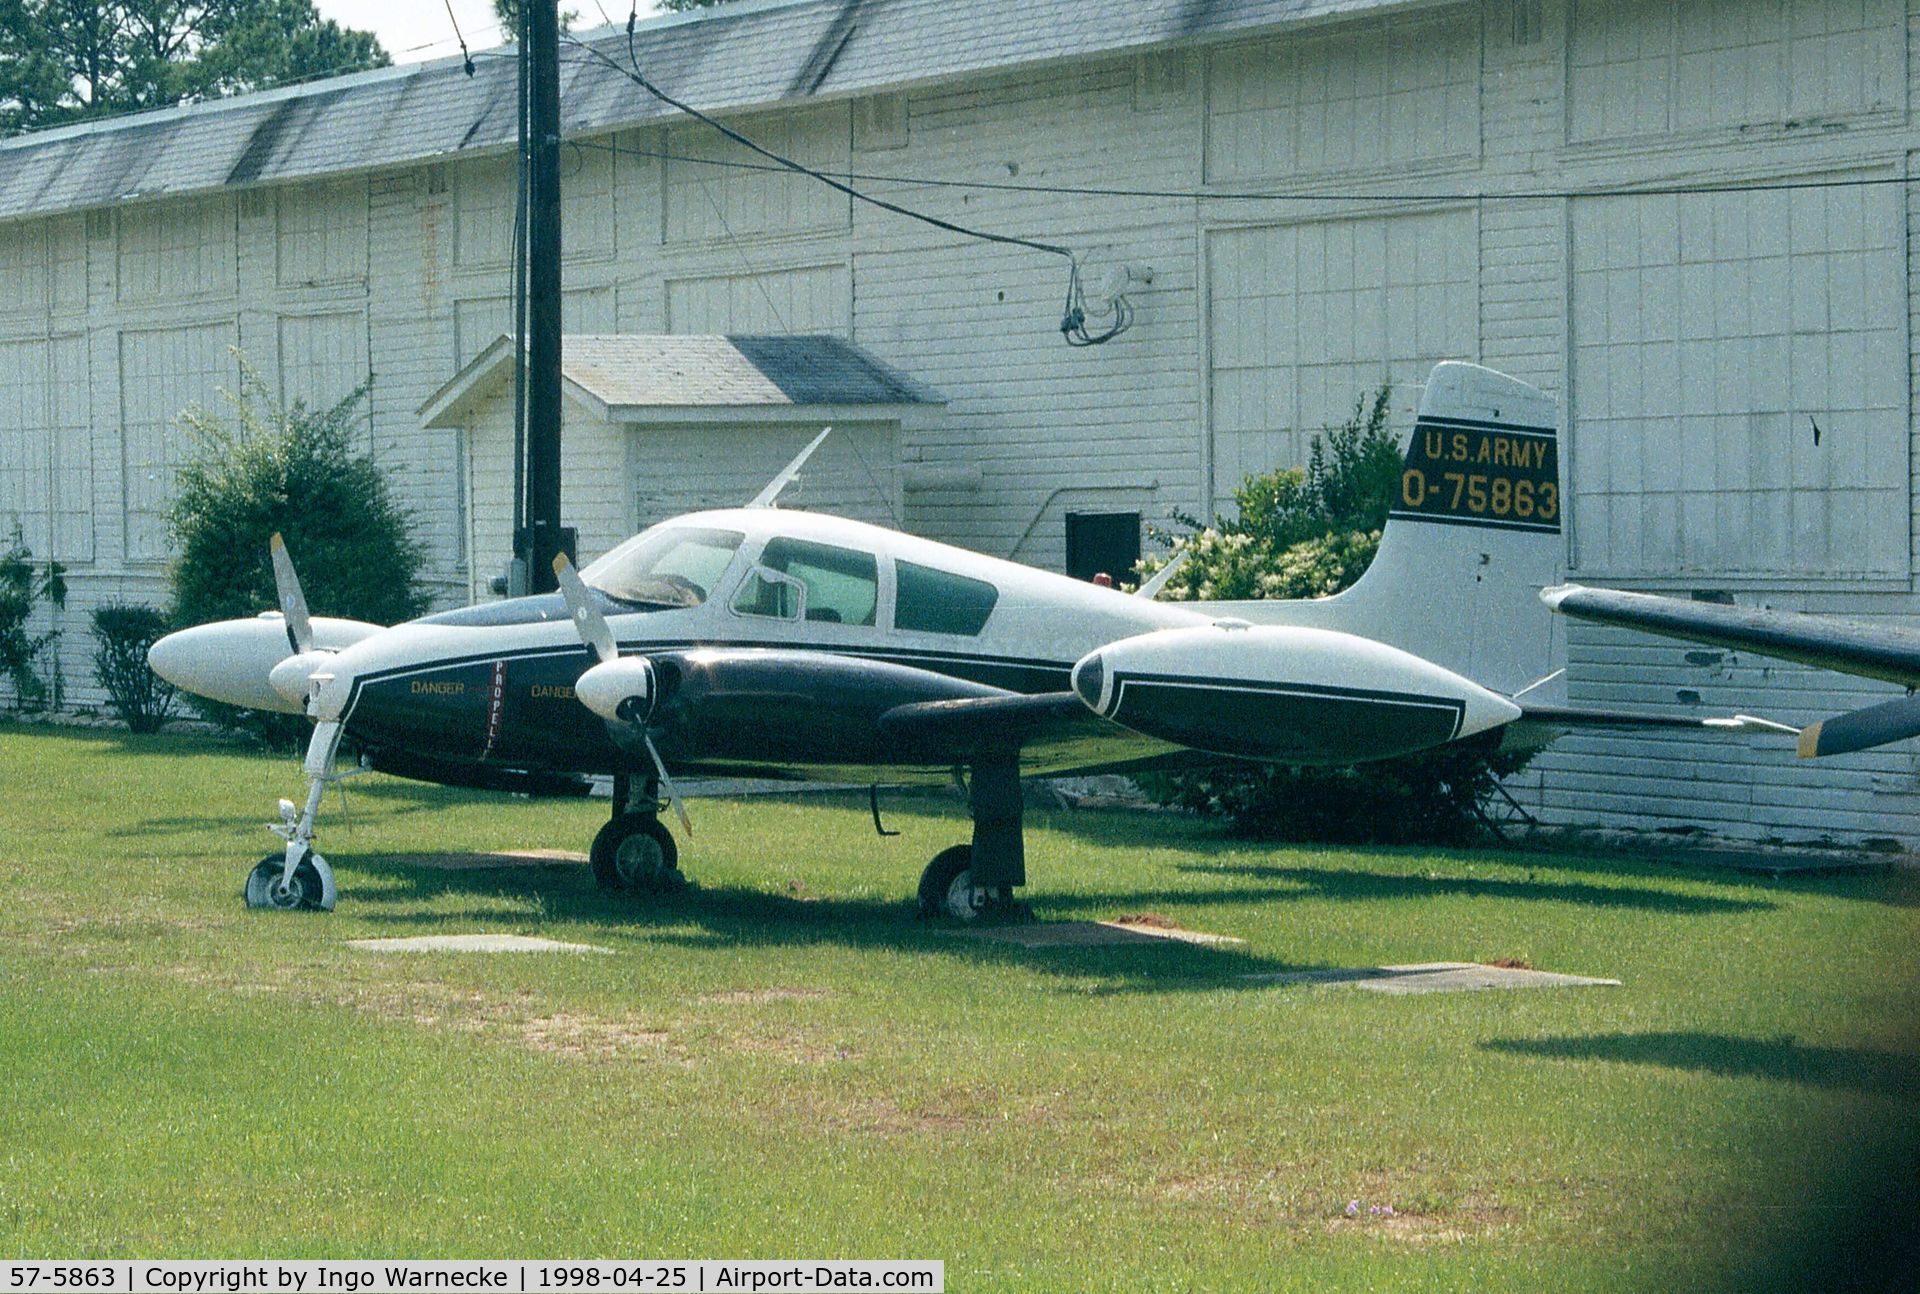 57-5863, 1957 Cessna U-3A Blue Canoe (310A) C/N 38018, Cessna Cessna U-3A-CE of the US Army Aviation at the Army Aviation Museum, Ft Rucker AL